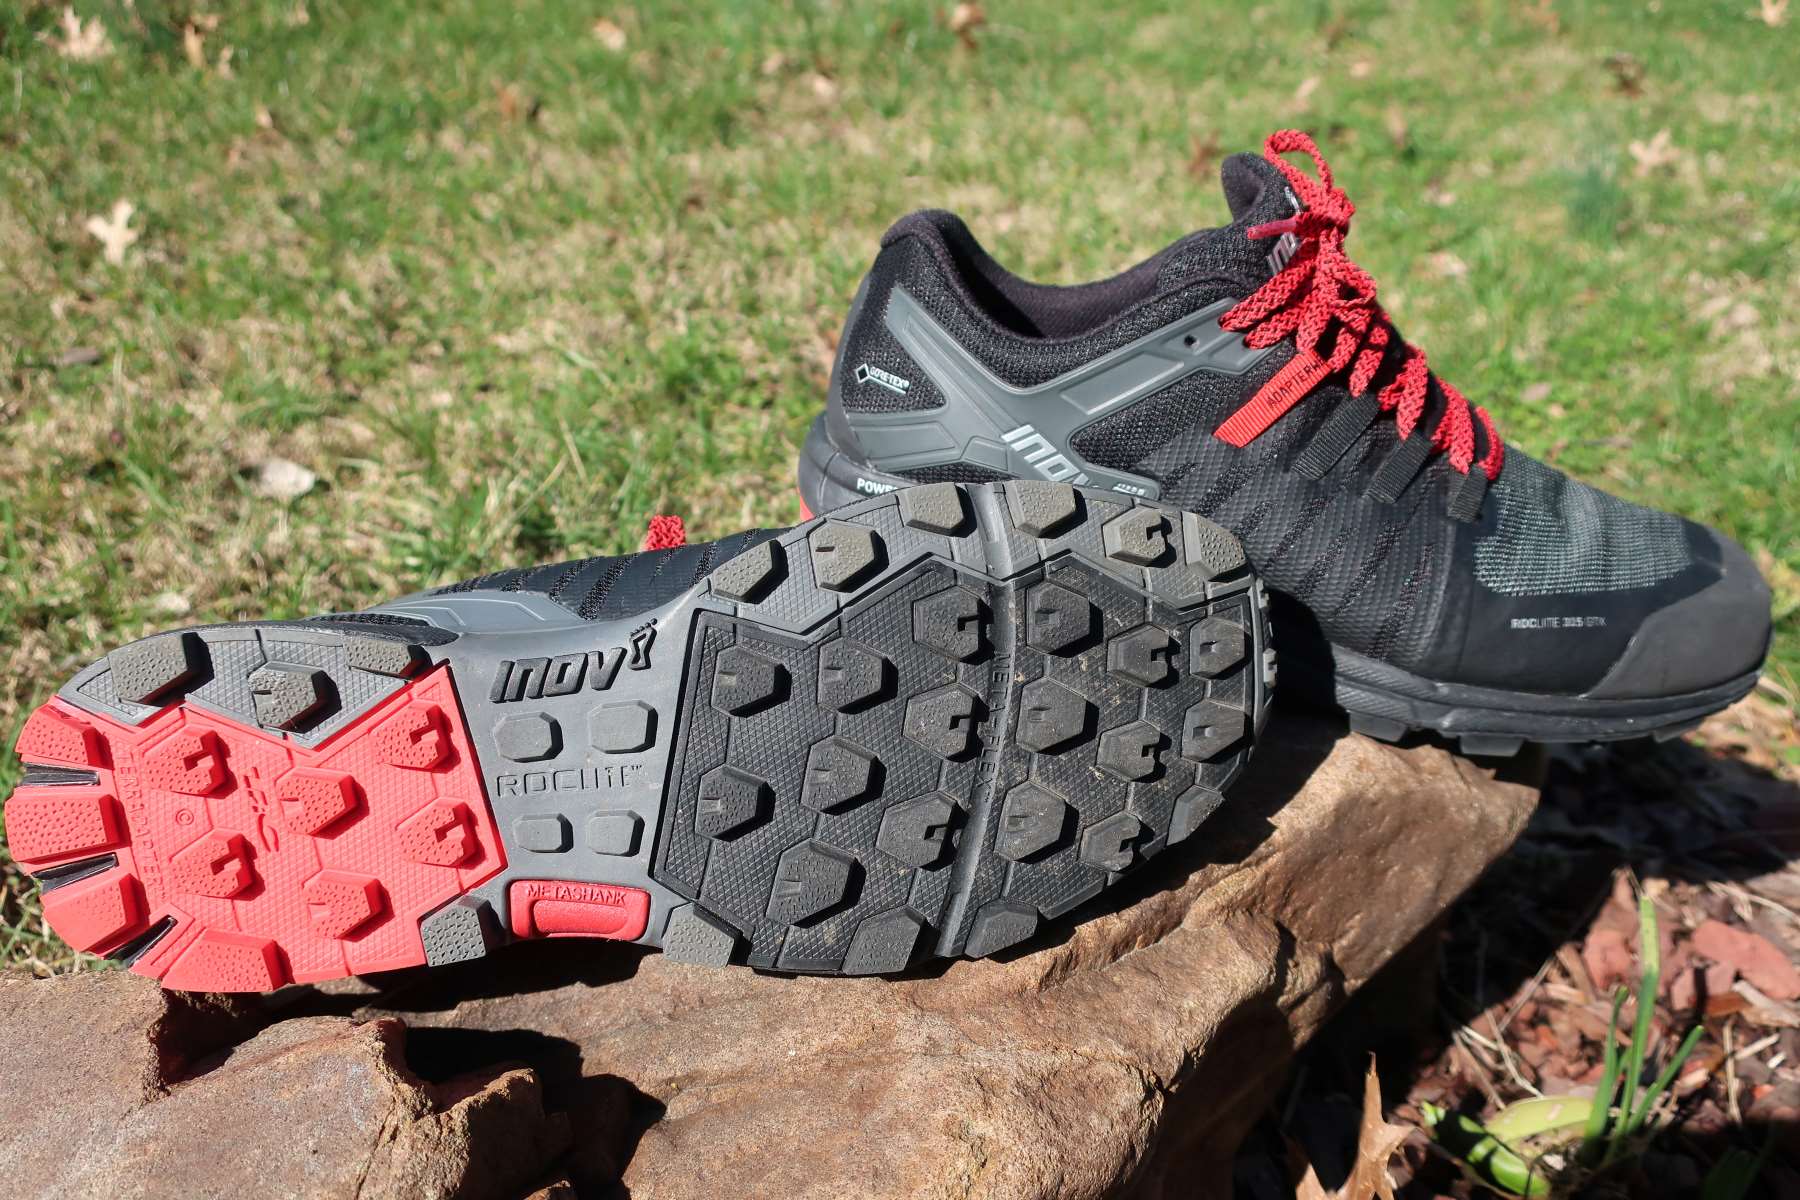 Review Of The Inov-8 Roclite 315 GTX Trail Shoe For Running, Priced At £145